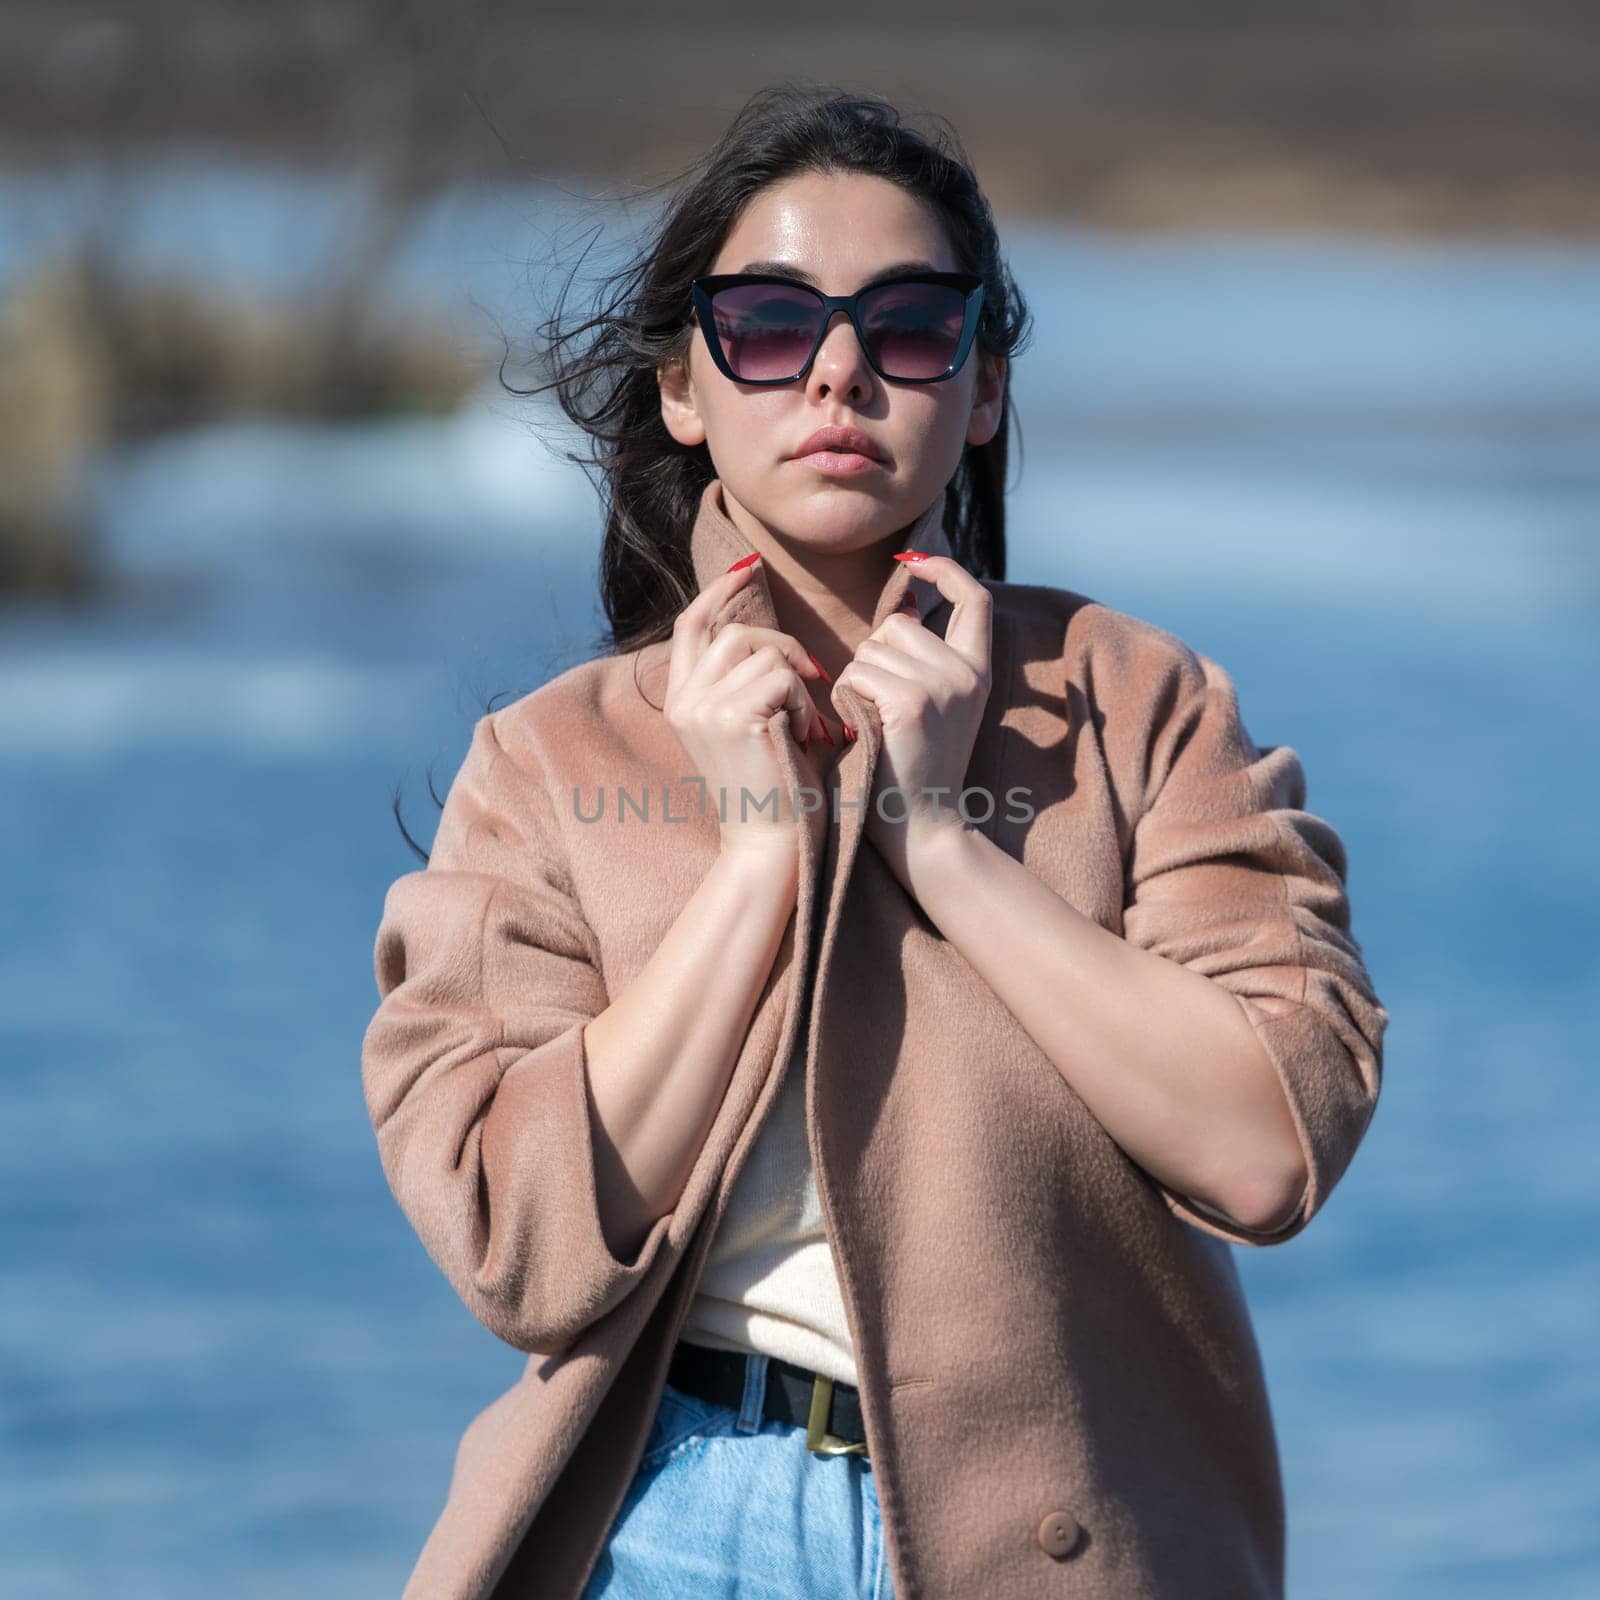 Glamorous young woman in sunglasses, dressed in beige coat standing outdoors on background blue lake by Alexander-Piragis